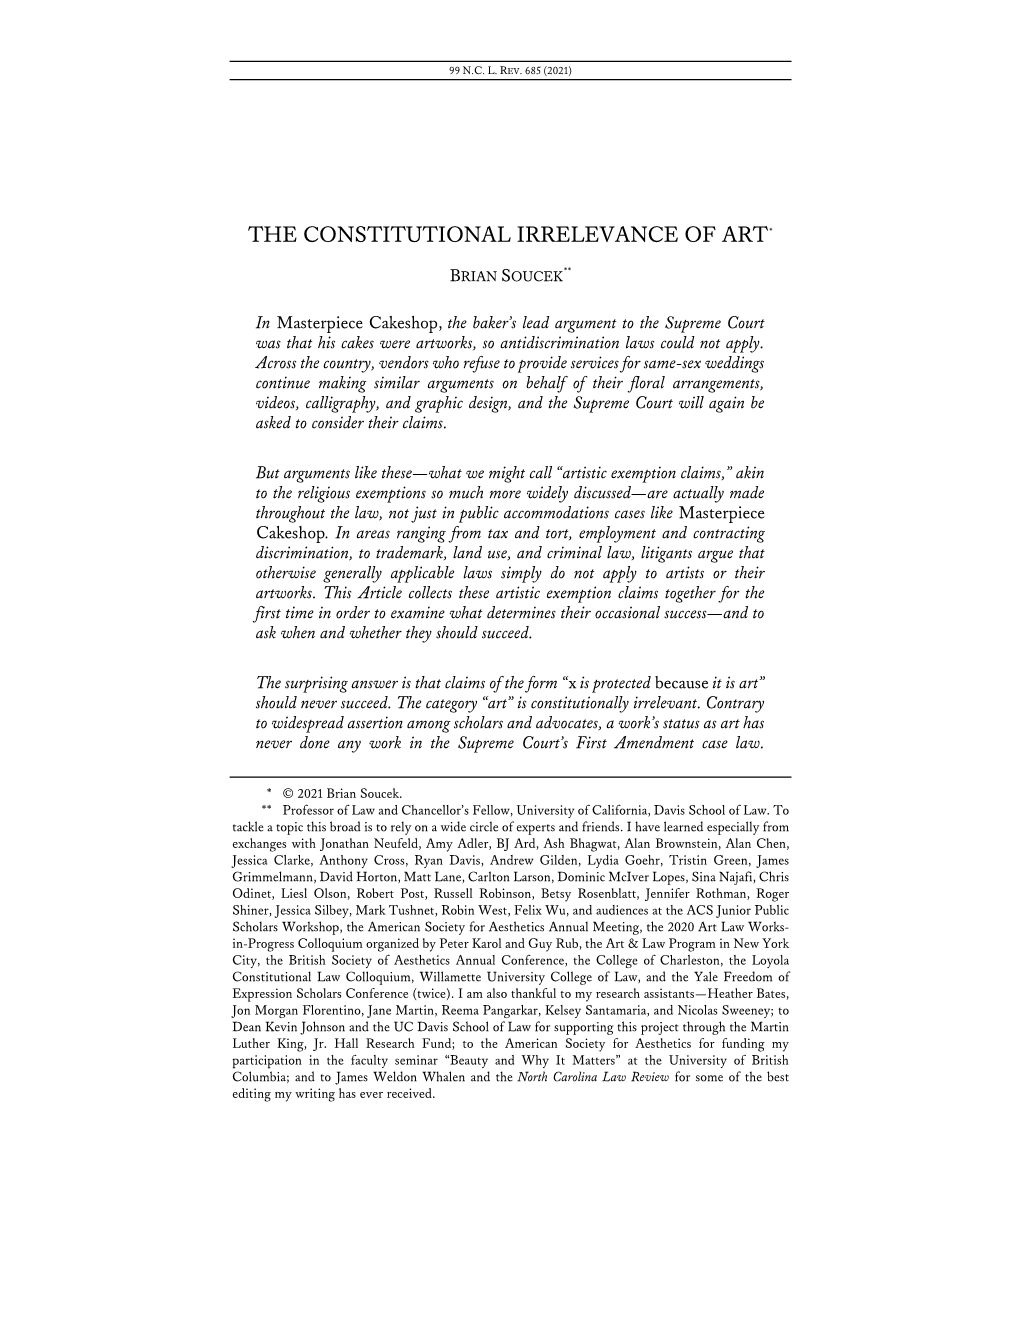 THE CONSTITUTIONAL IRRELEVANCE of ART, Brian Soucek